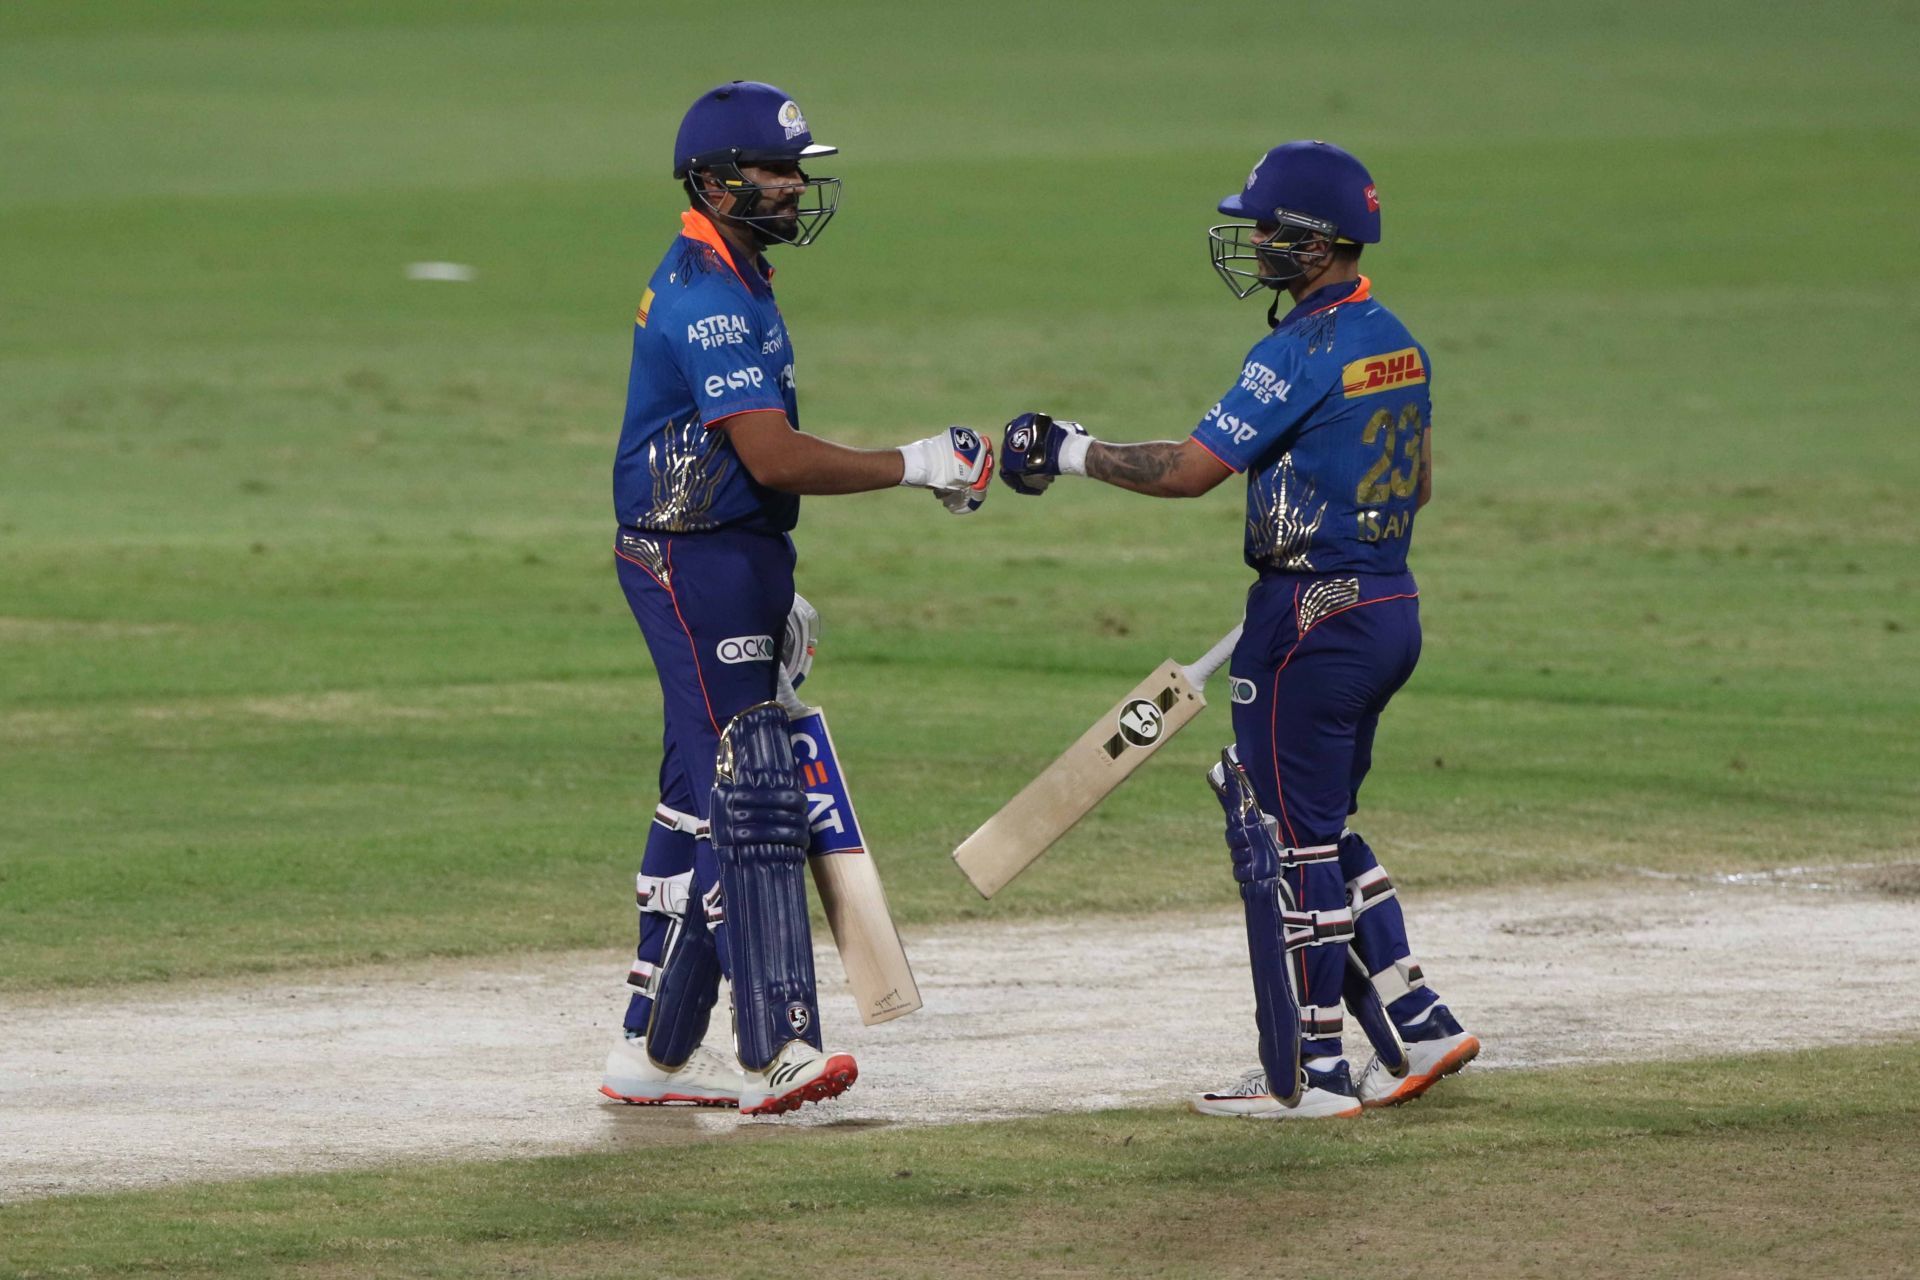 Rohit Sharma and Ishan Kishan are likely to open for the Mumbai Indians in IPL 2022 [P/C: iplt20.com]